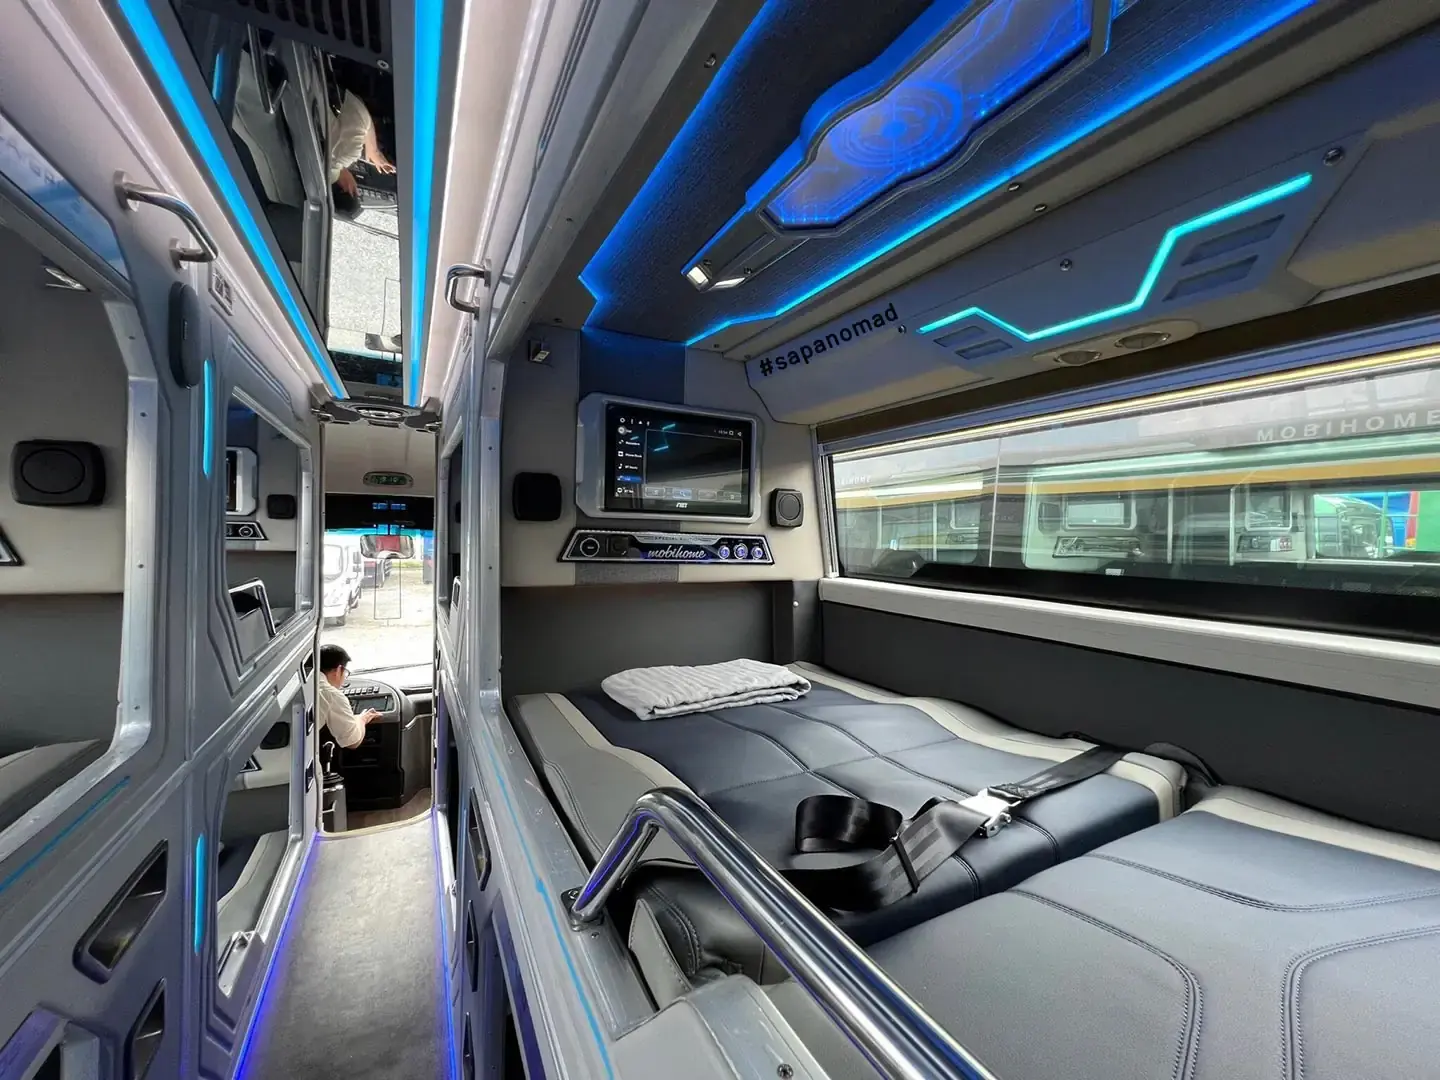 Sleeper bus from the inside